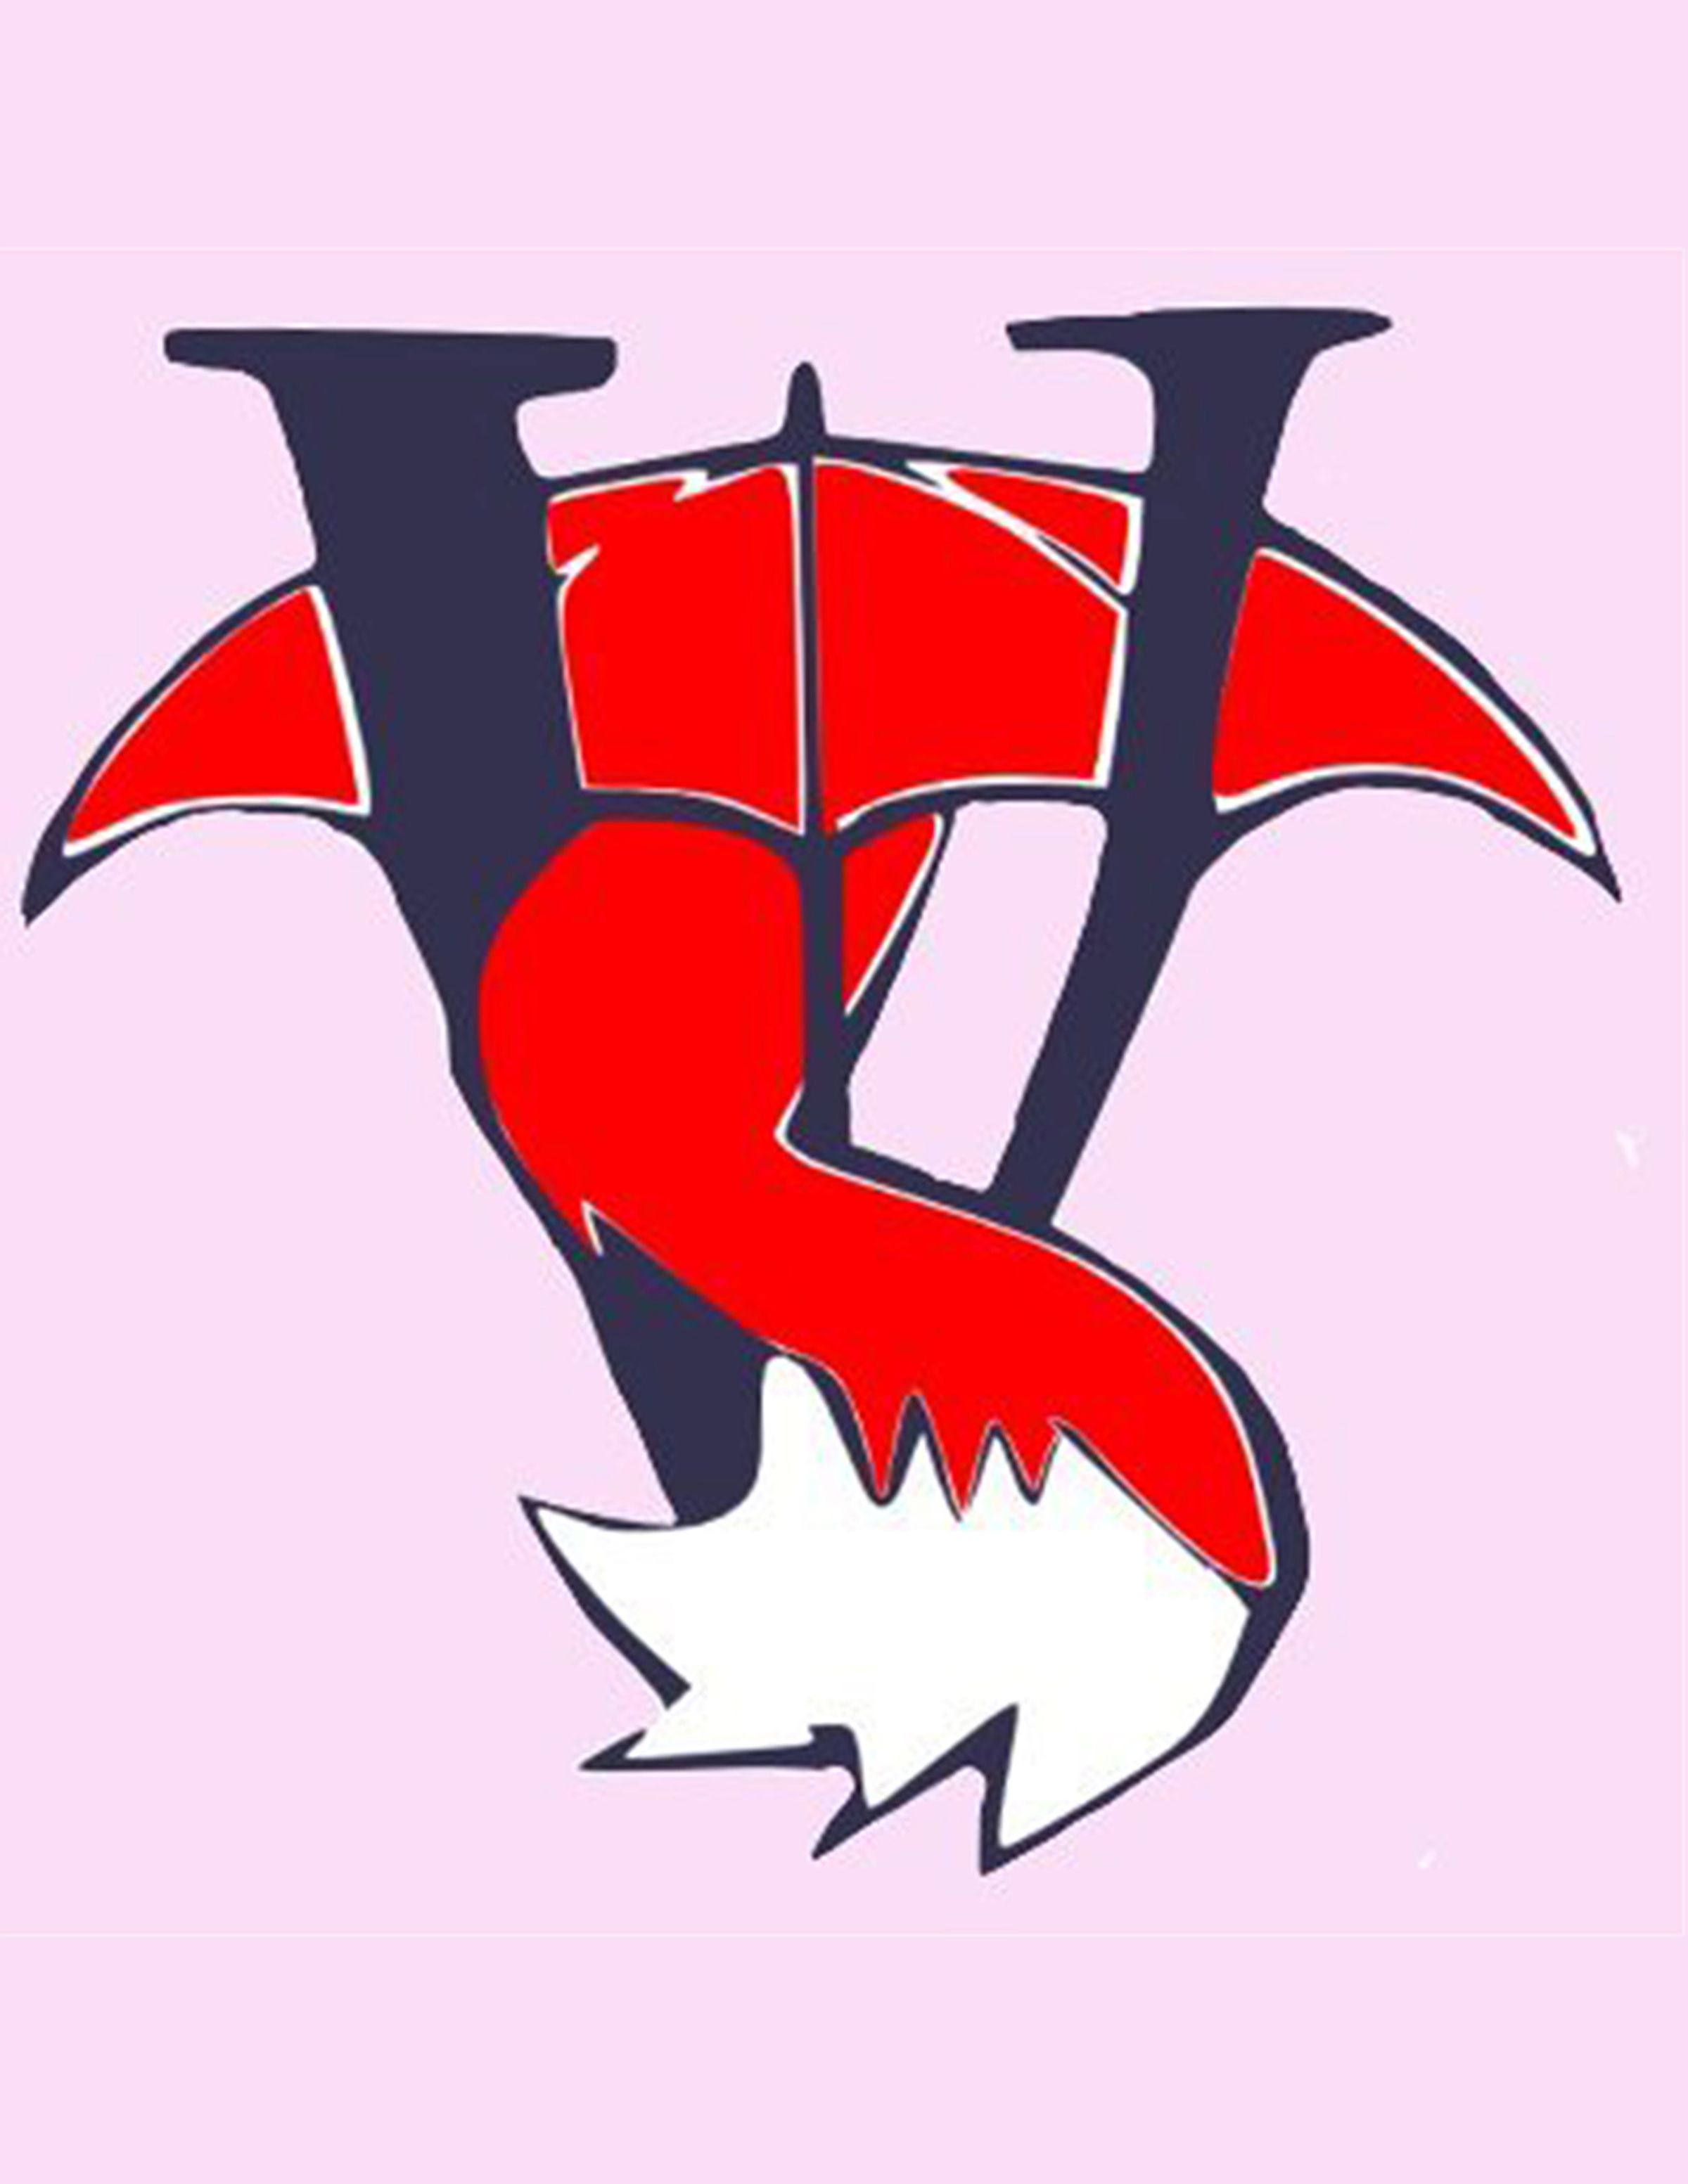 A logo on a pink background of a red and white fox tail coming out from underneath a red umbrella and wrapped around the a large, purple letter V